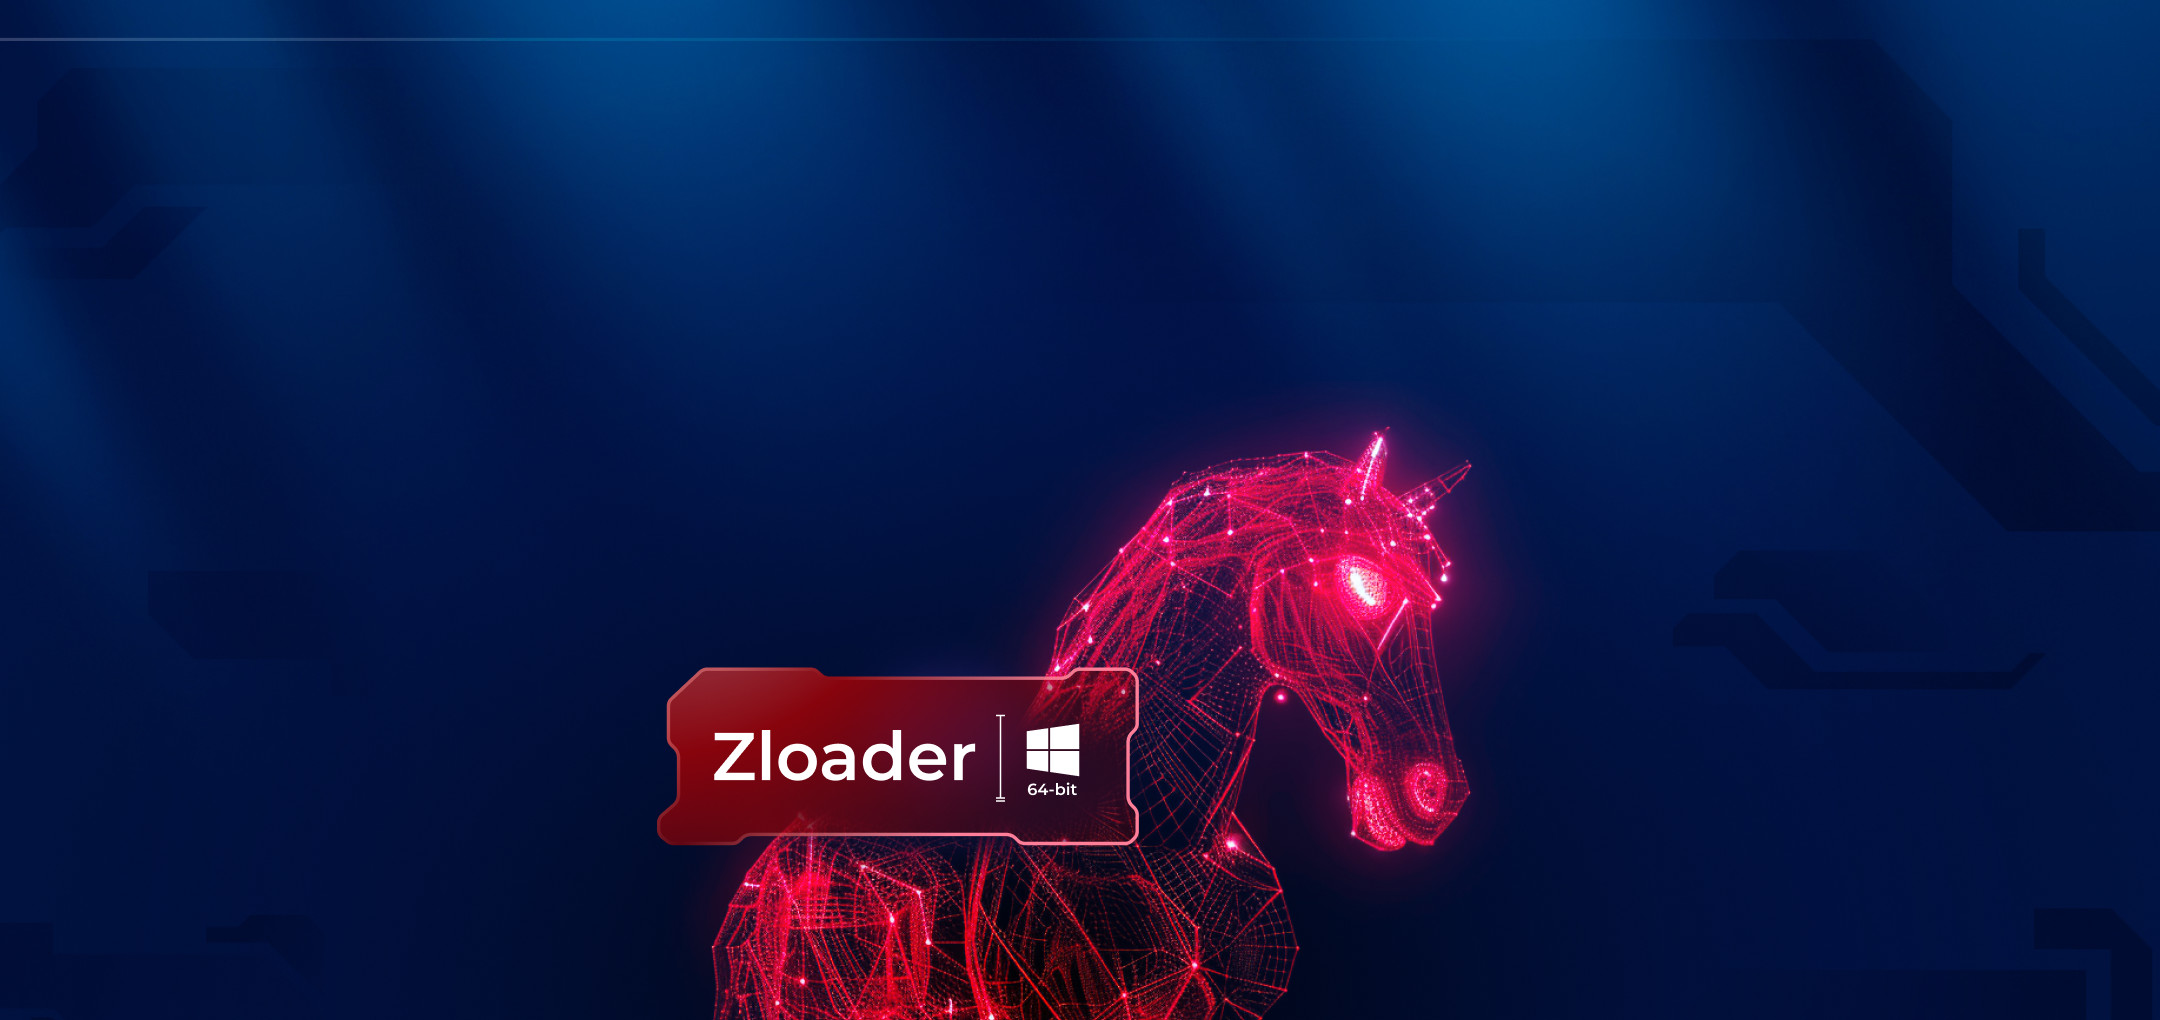 ZLoader Now Targets 64-bit Systems: Analyze The New Version in ANY.RUN 